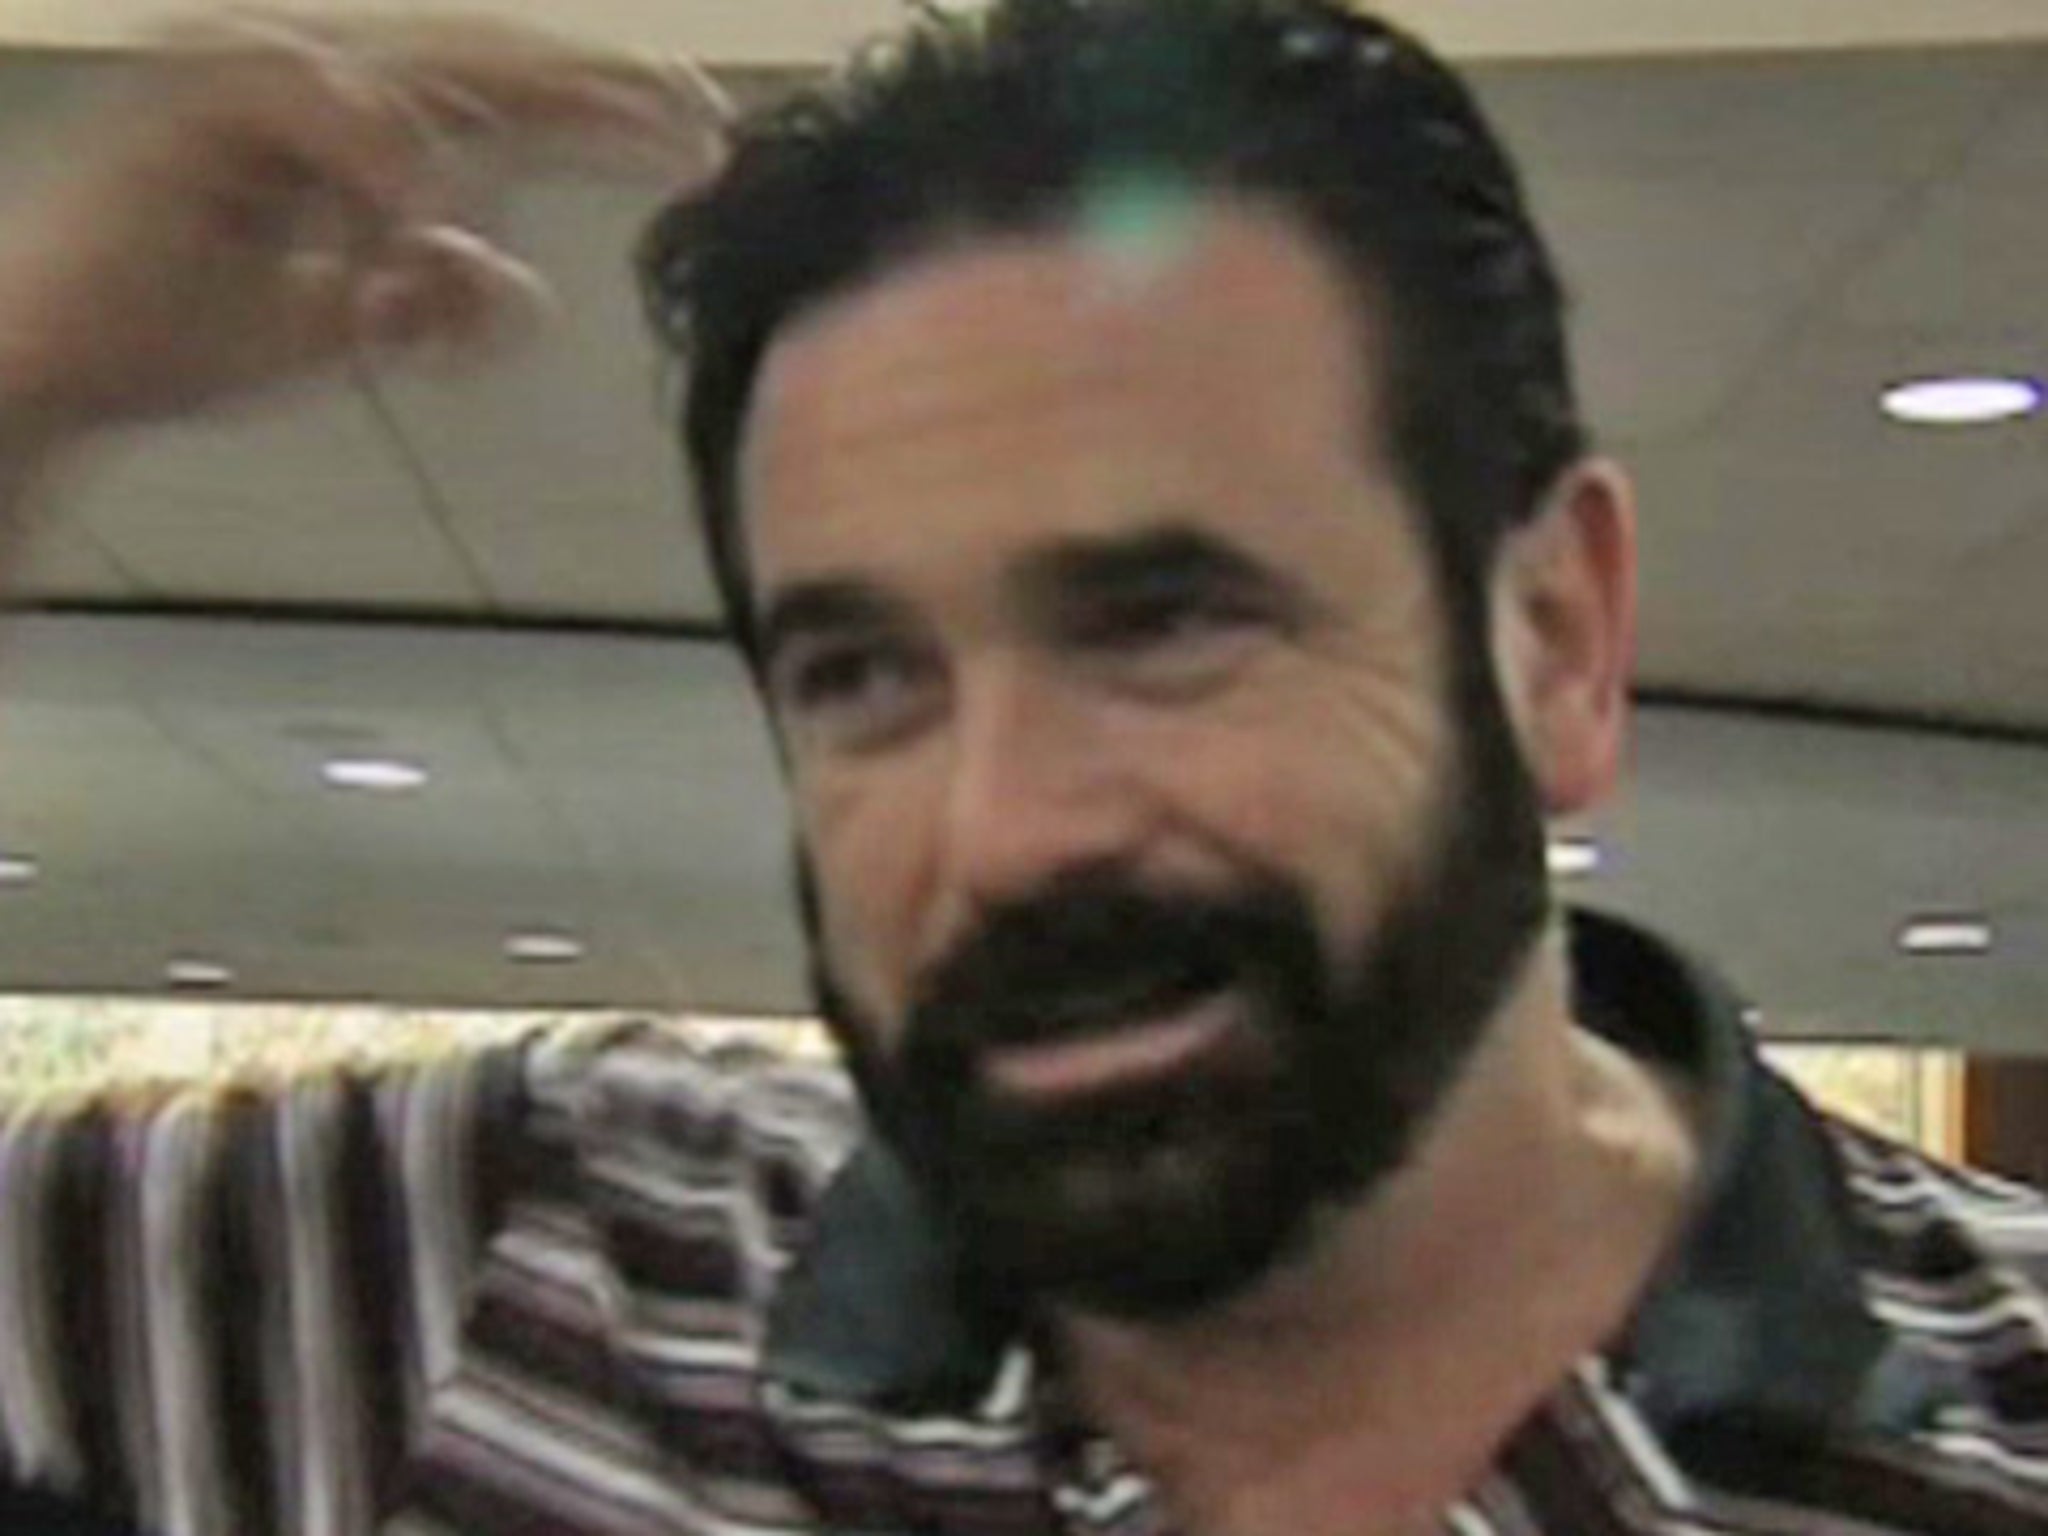 Remembering Billy Mays